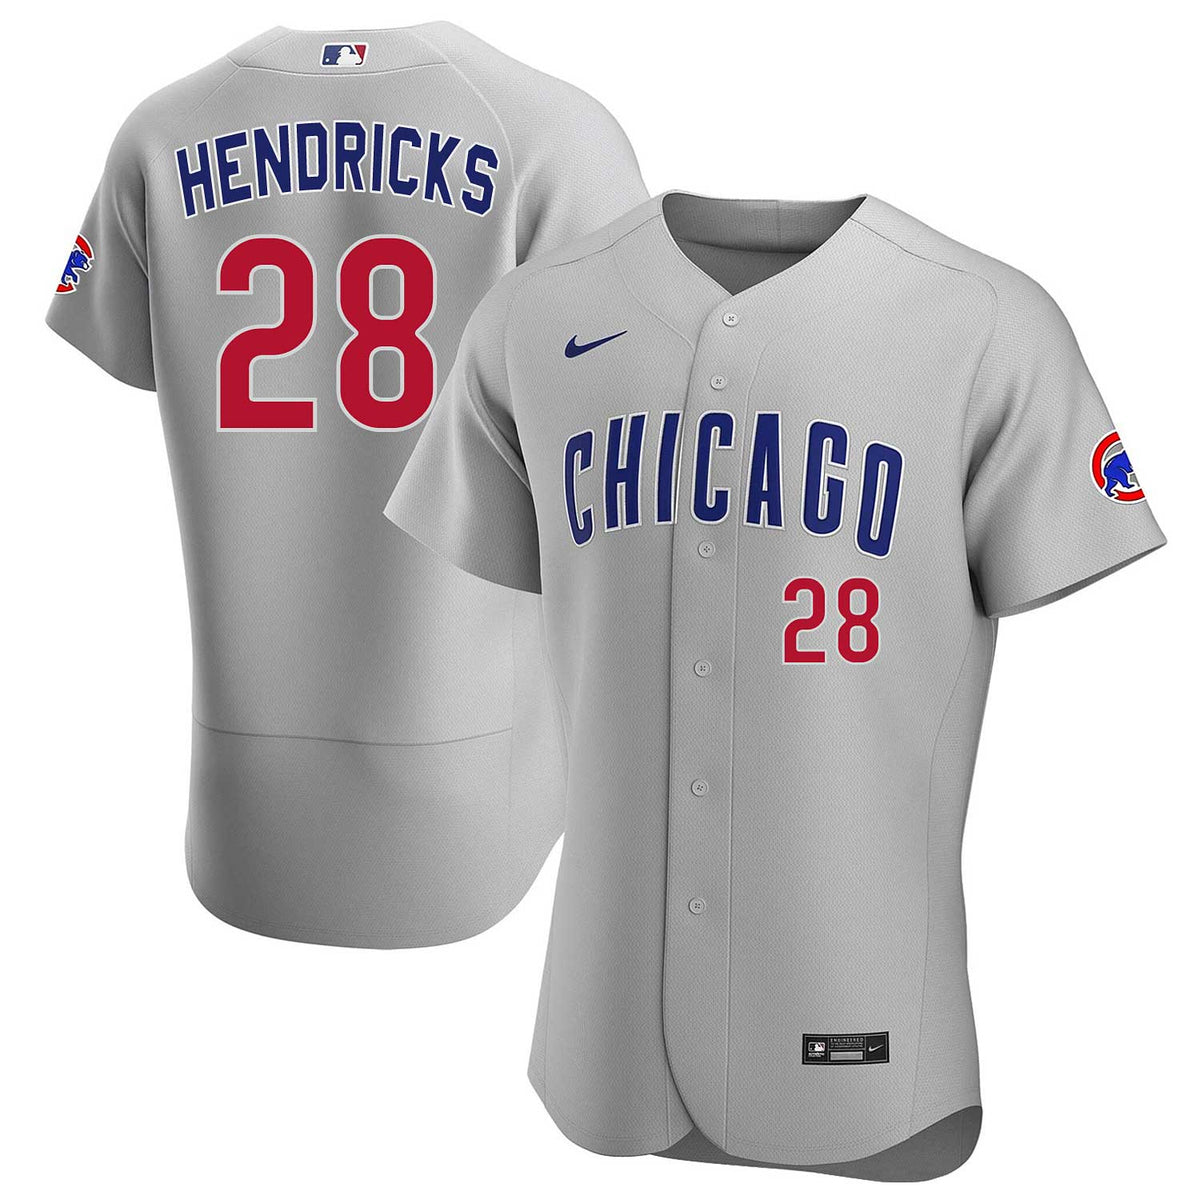 Kyle Hendricks Chicago Cubs Jersey Number Kit, Authentic Home Jersey Any  Name or Number Available at 's Sports Collectibles Store